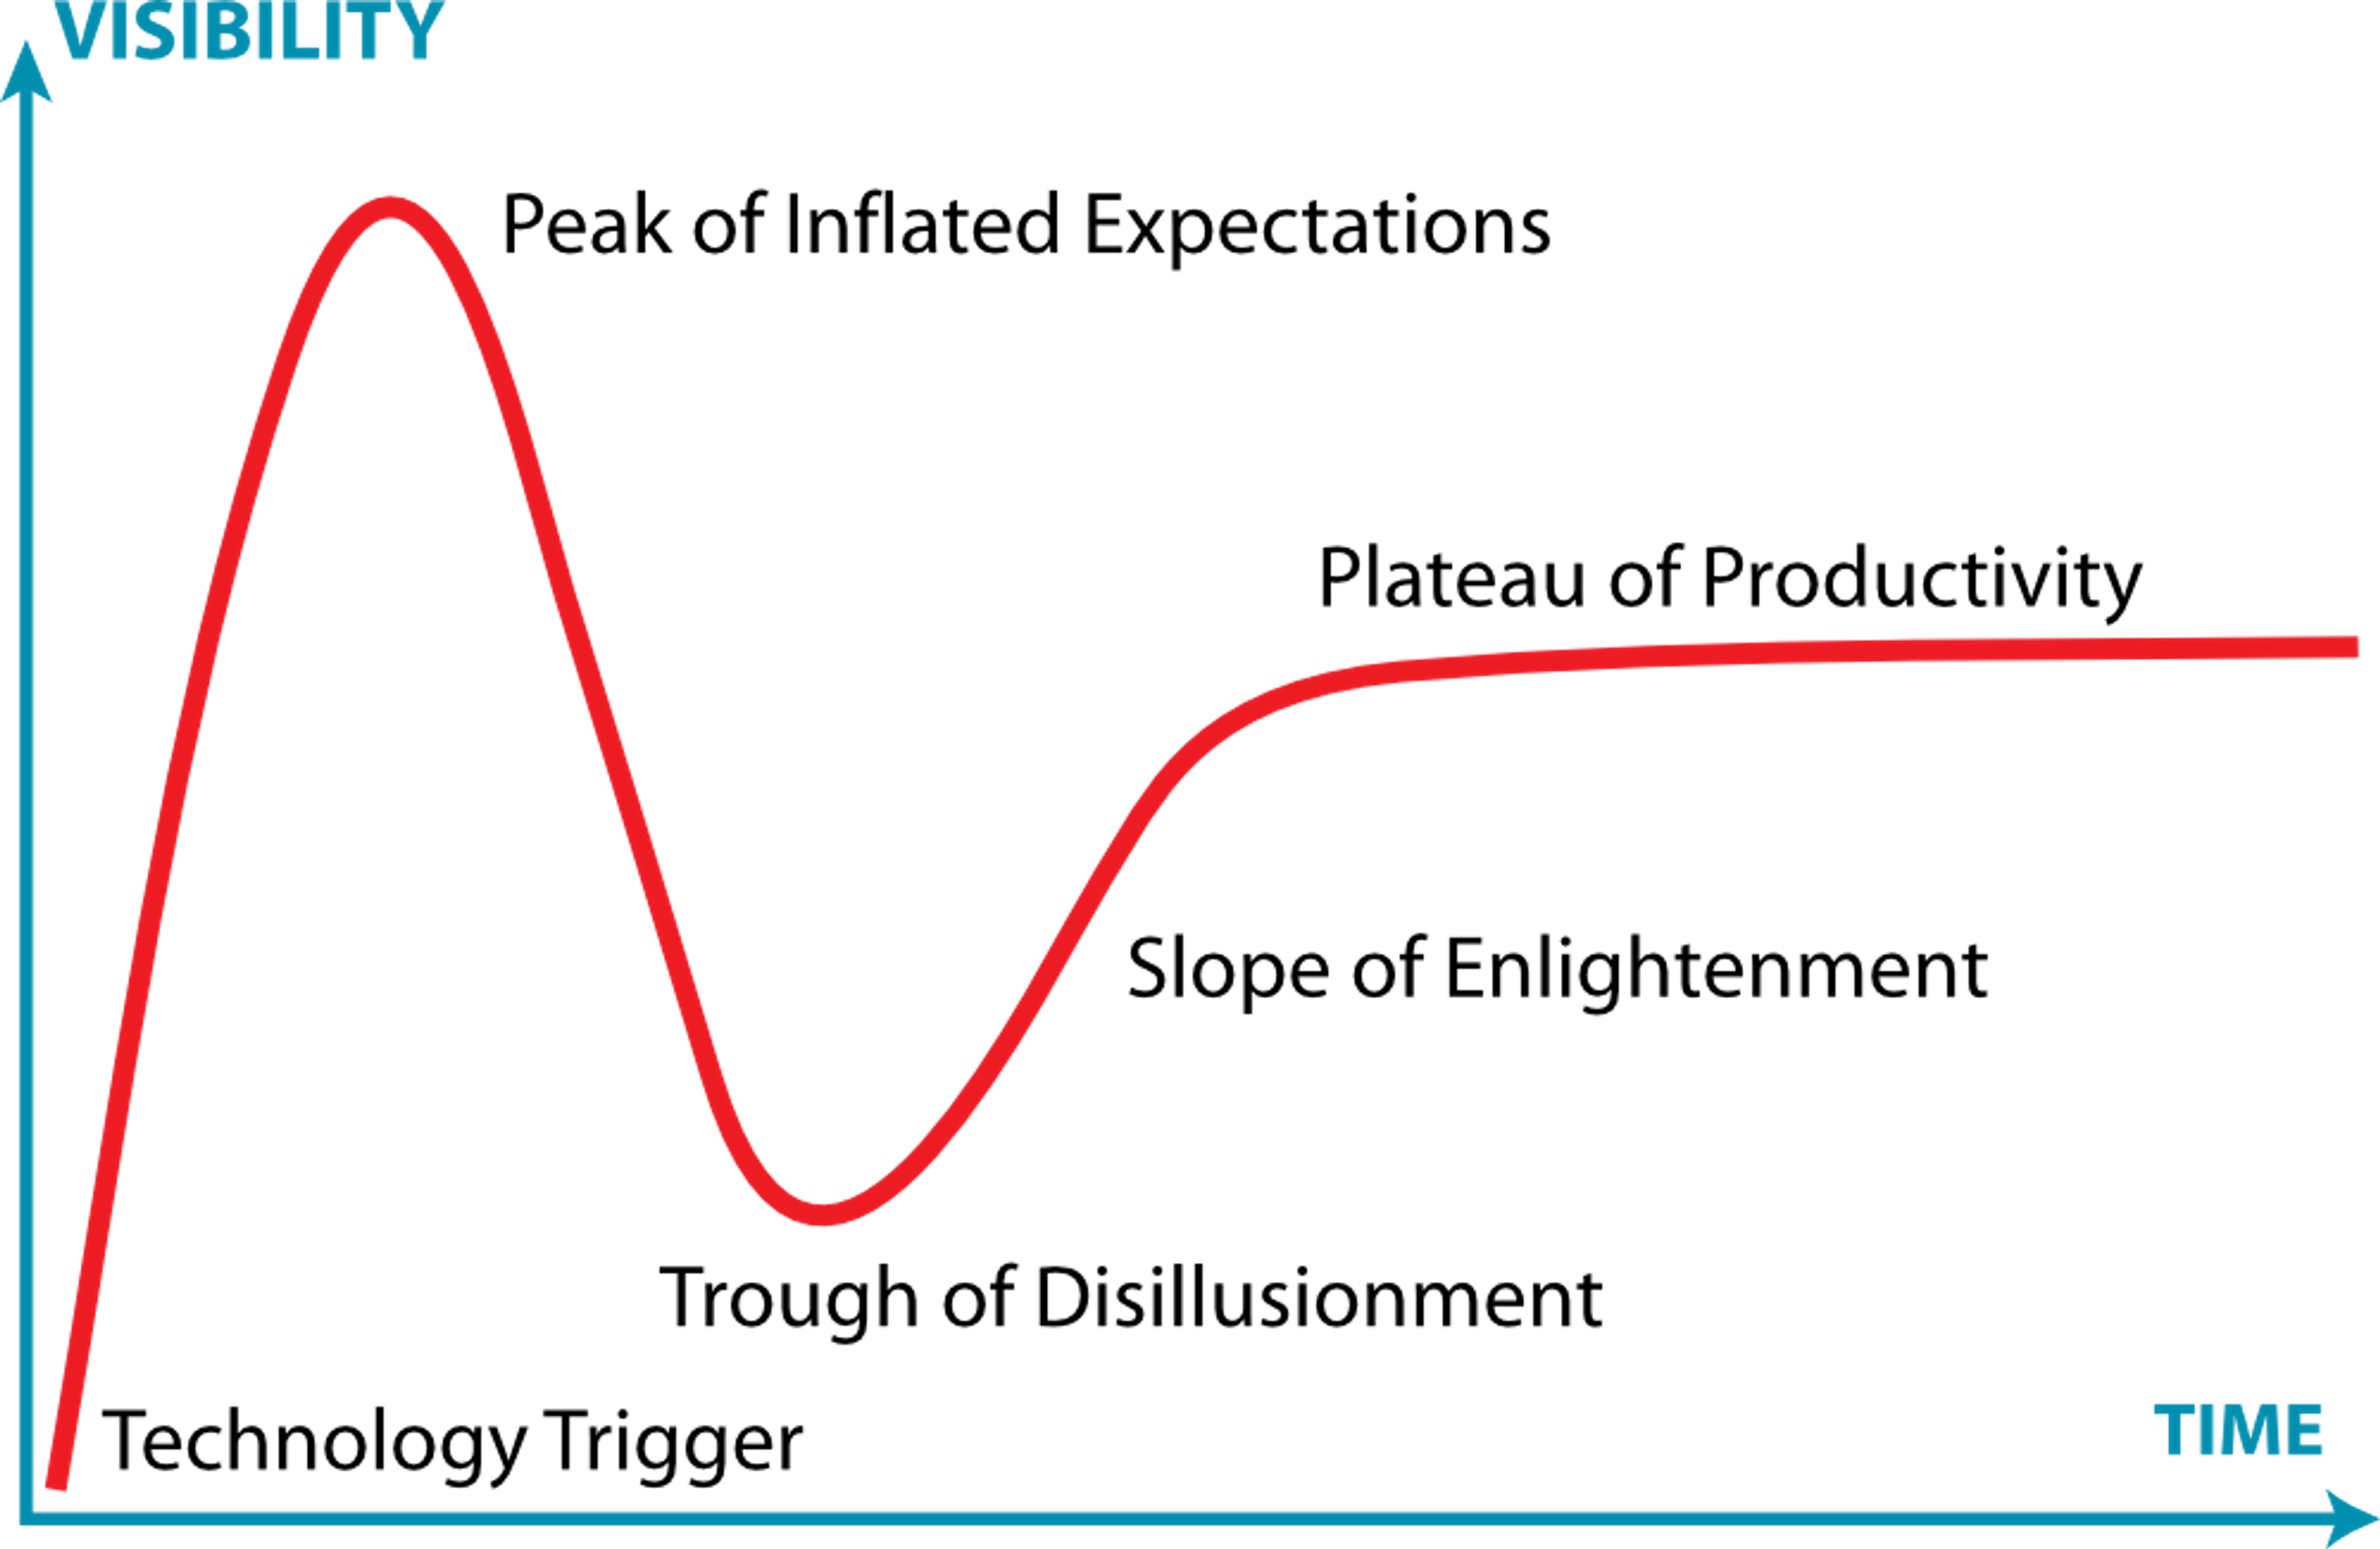 A chart. On the Y axis, "visibility". On the X axis, "time". The curve on the chart has labels at key events. The curve begins in the lower left with the "technology trigger". It then soars upward with the "peak of inflated expectations". It then crashes downward in the "trough of disillusionment". Finally, it climbs back to a middle ground with the "slope of enlightenment", before leveling off on the "plateau of productivity"